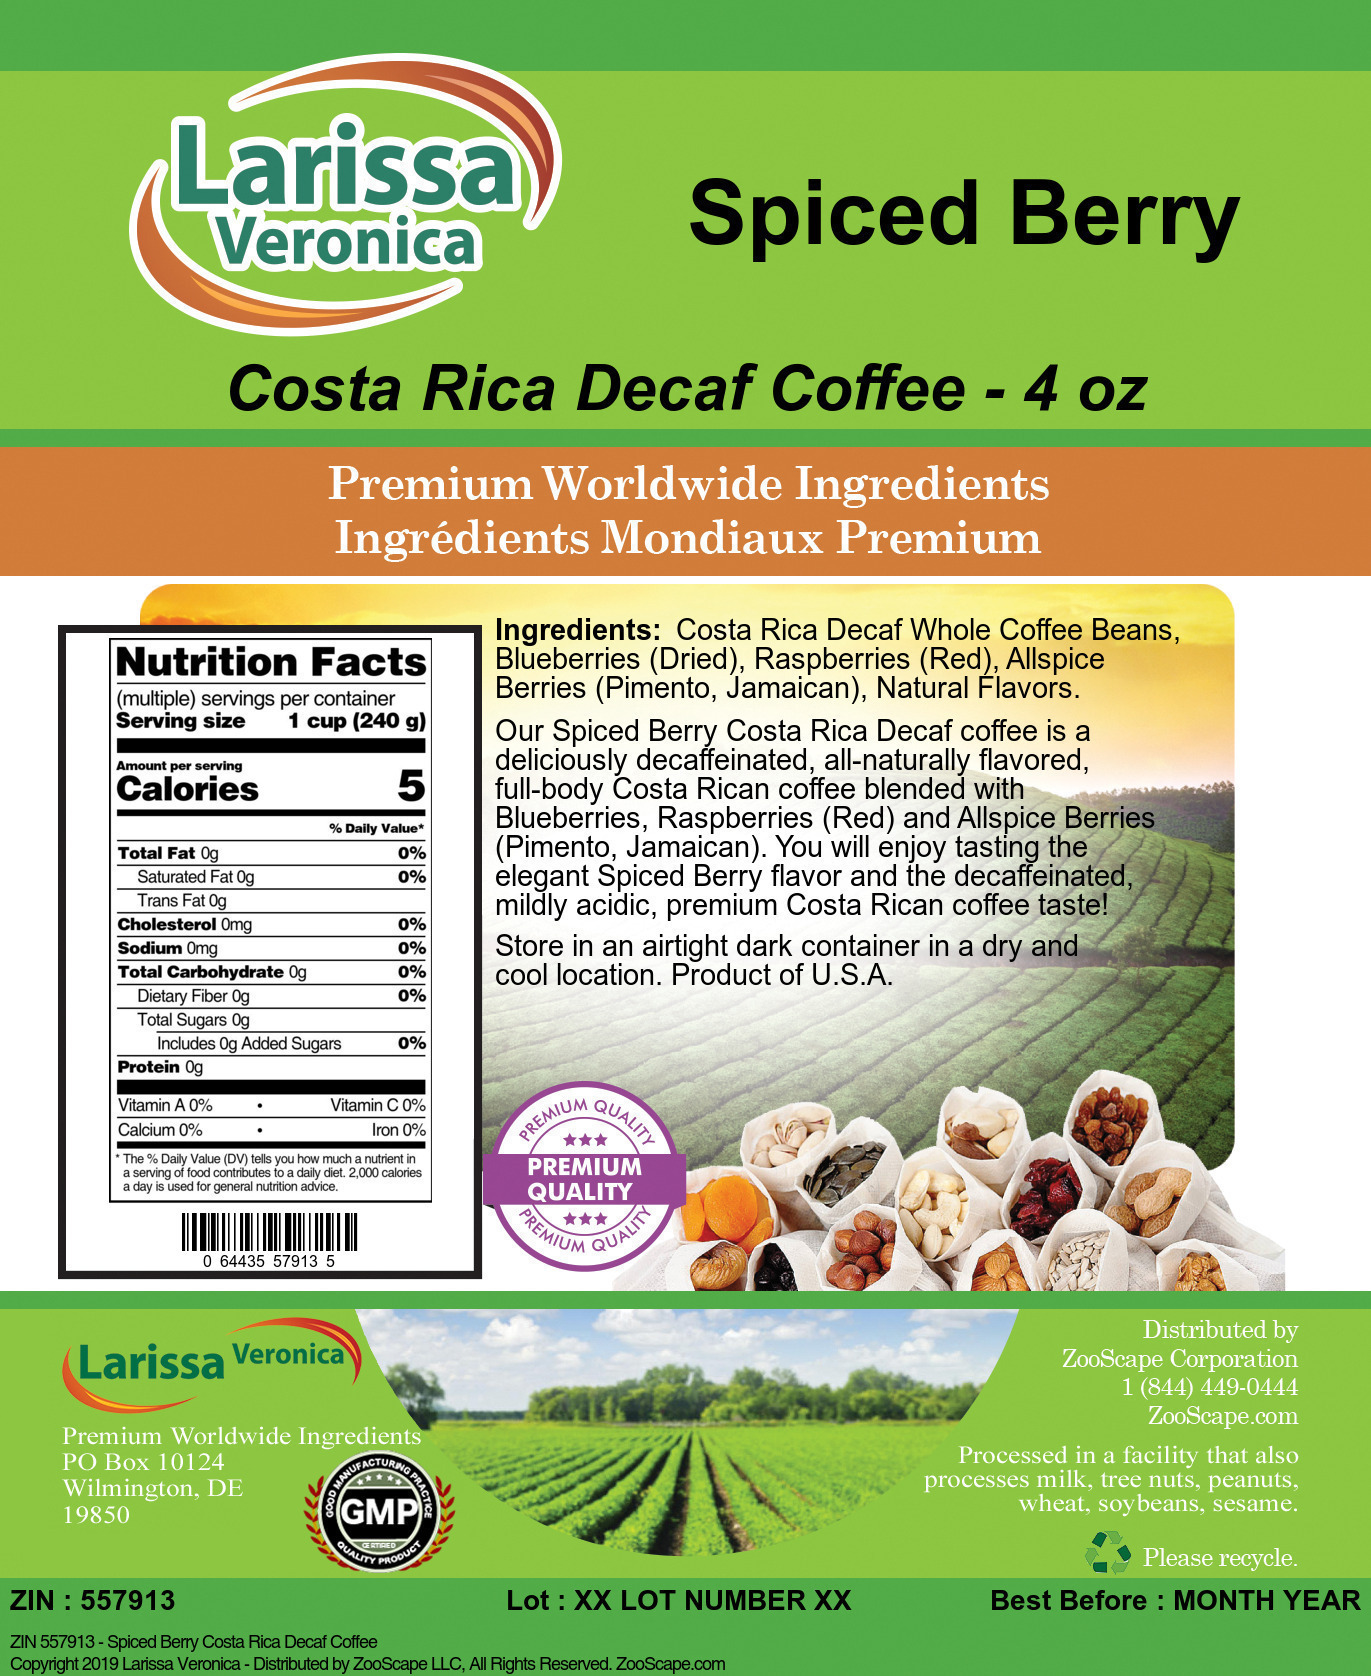 Spiced Berry Costa Rica Decaf Coffee - Label